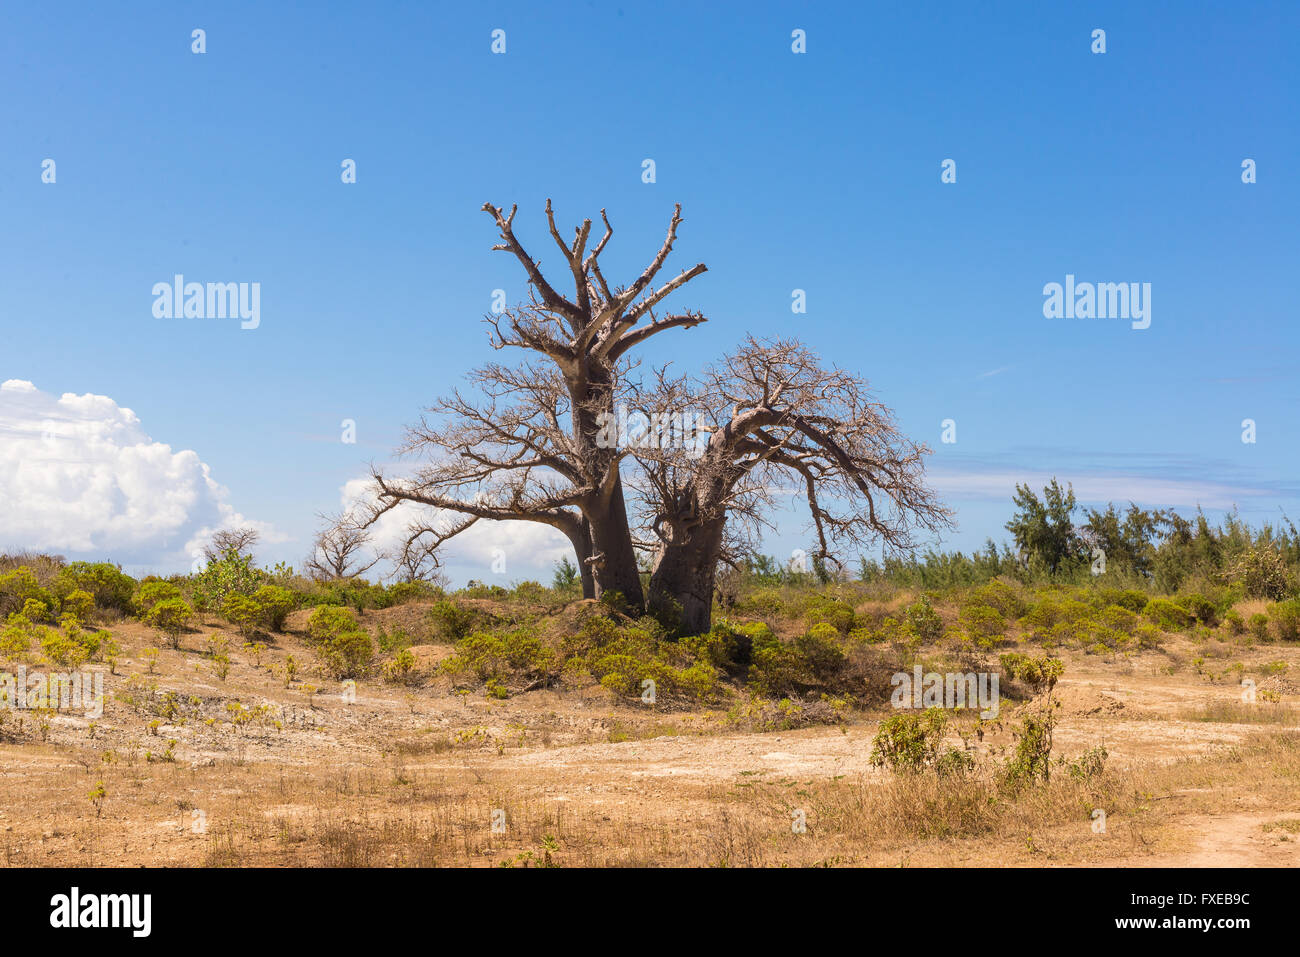 Big baobab tree growing surrounded by African Savannah Stock Photo